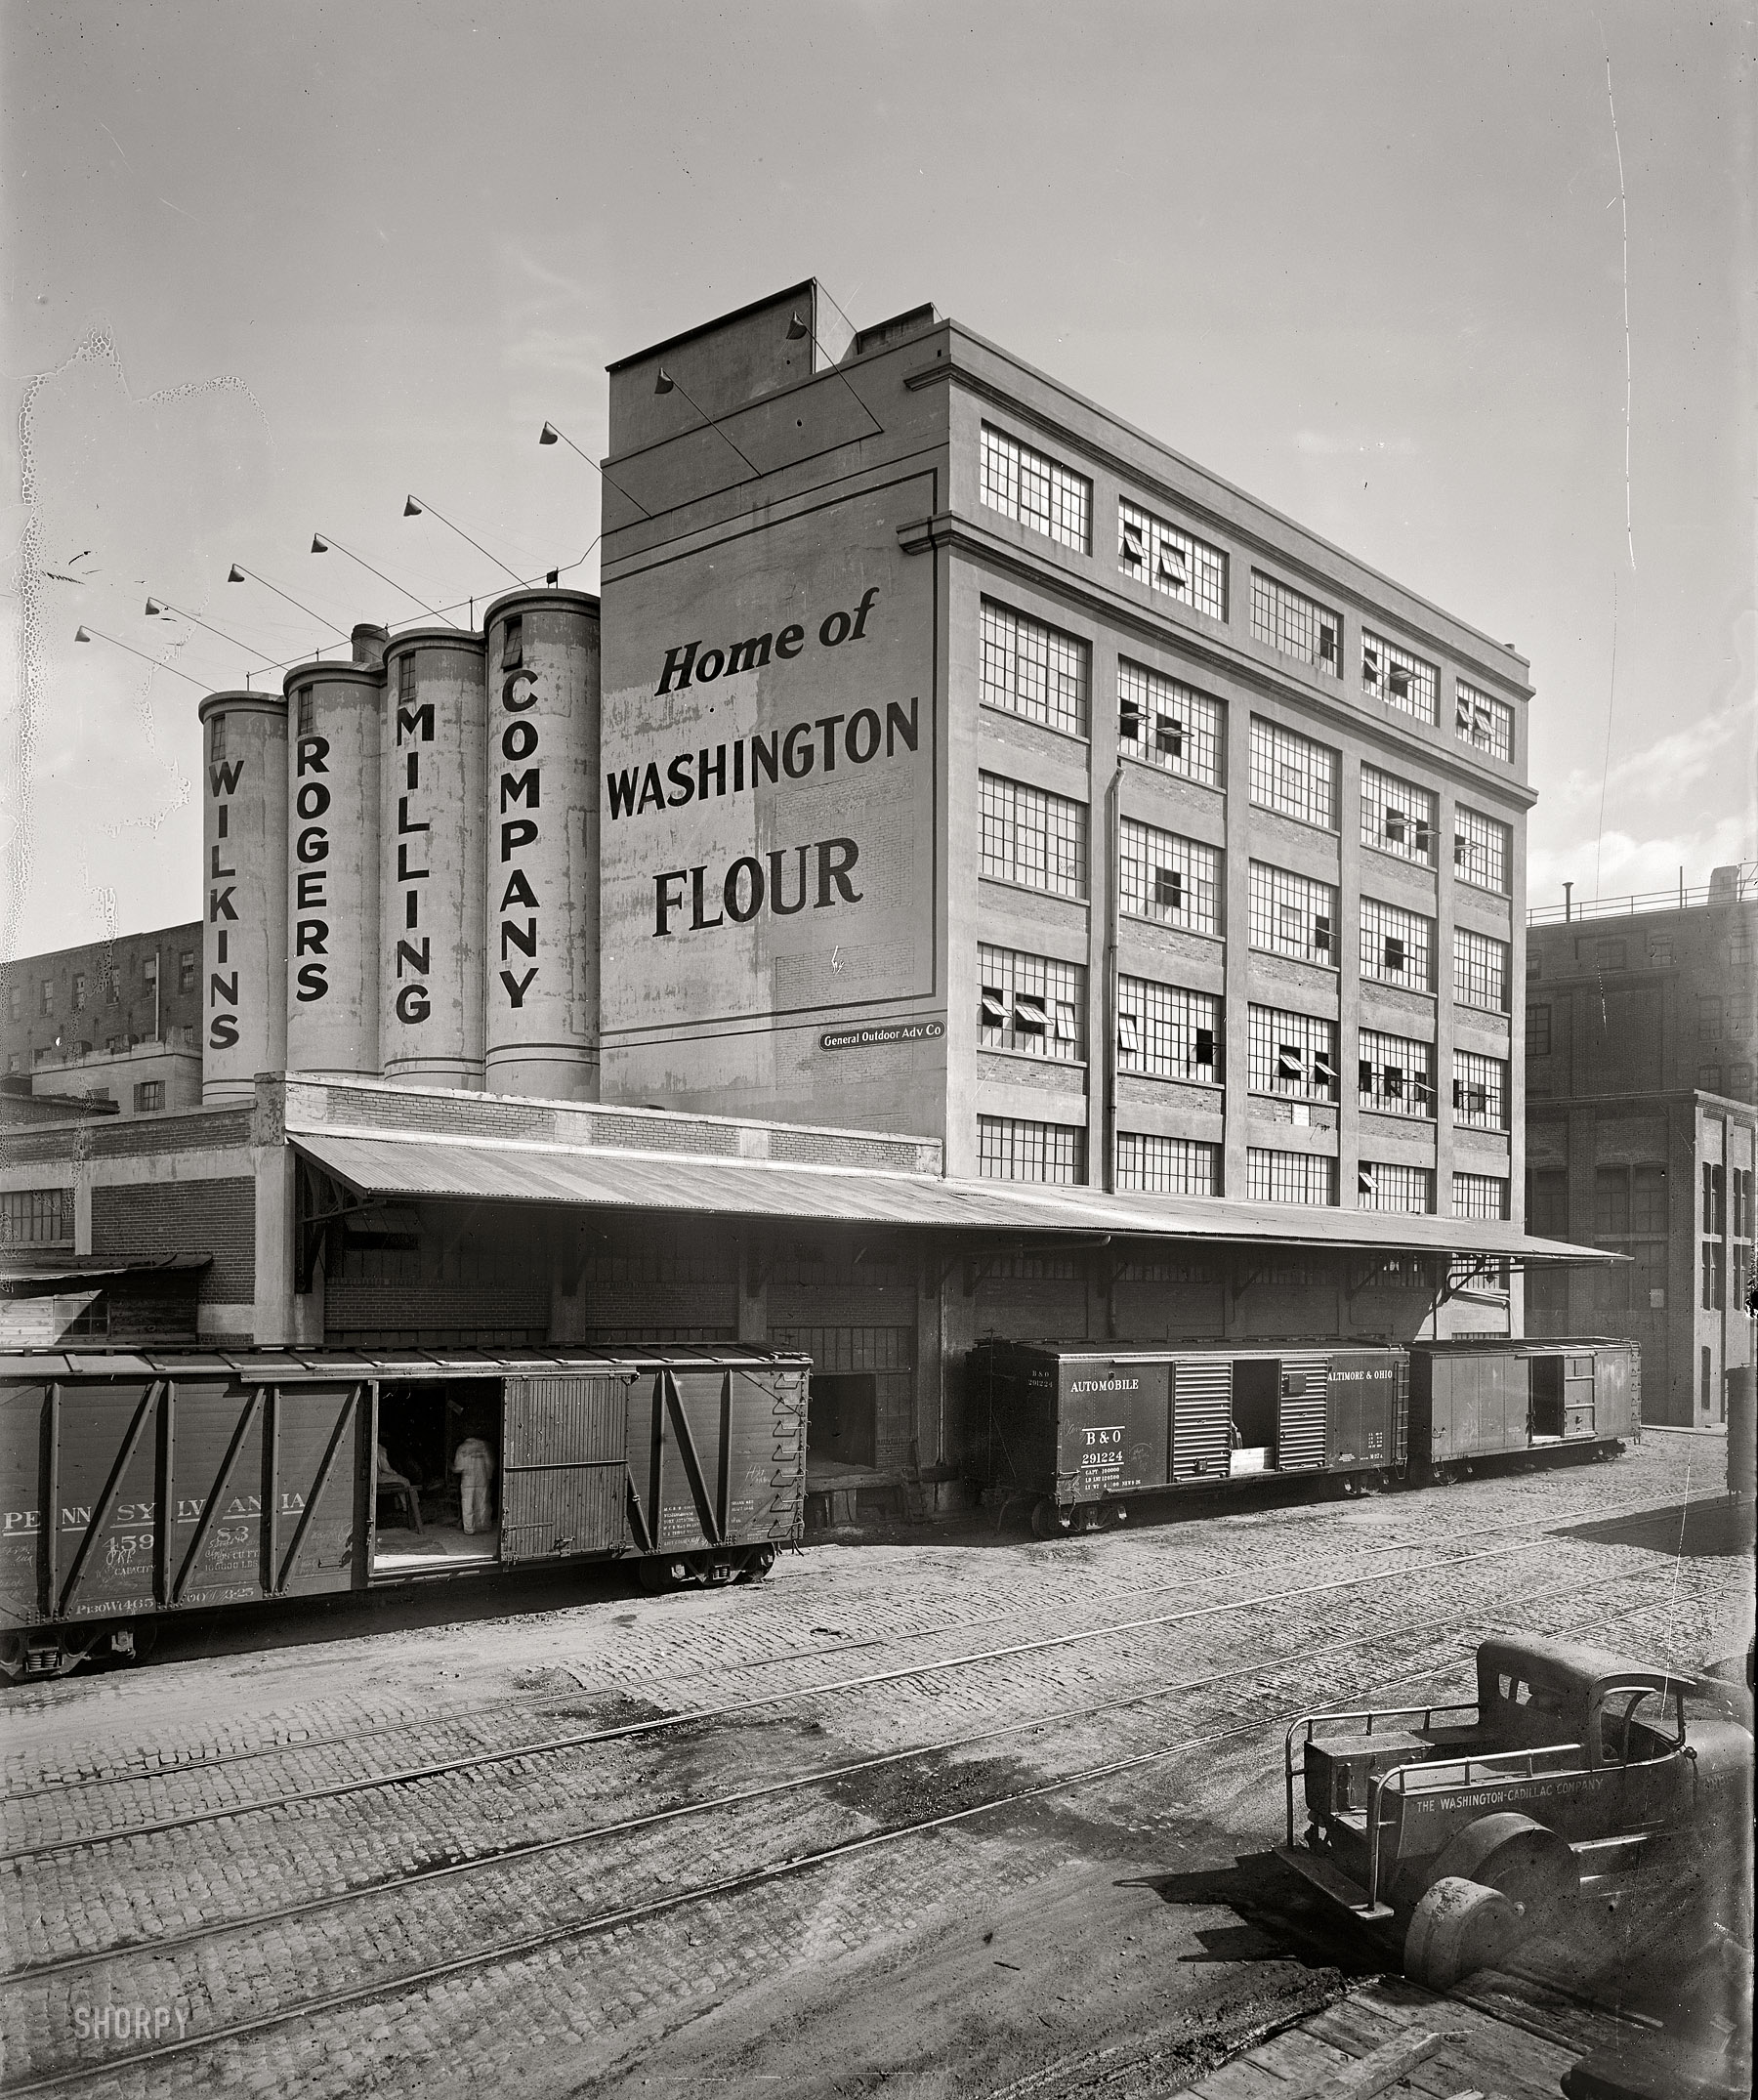 Washington, D.C., circa 1926. "Wilkins-Rogers Milling Co., exterior, 3261 Water Street." The Washington Flour mill on K Street, formerly Water Street, in Georgetown. The Washington Flour brand had a retail presence at least into the late 1960s. National Photo Company Collection glass negative. View full size.